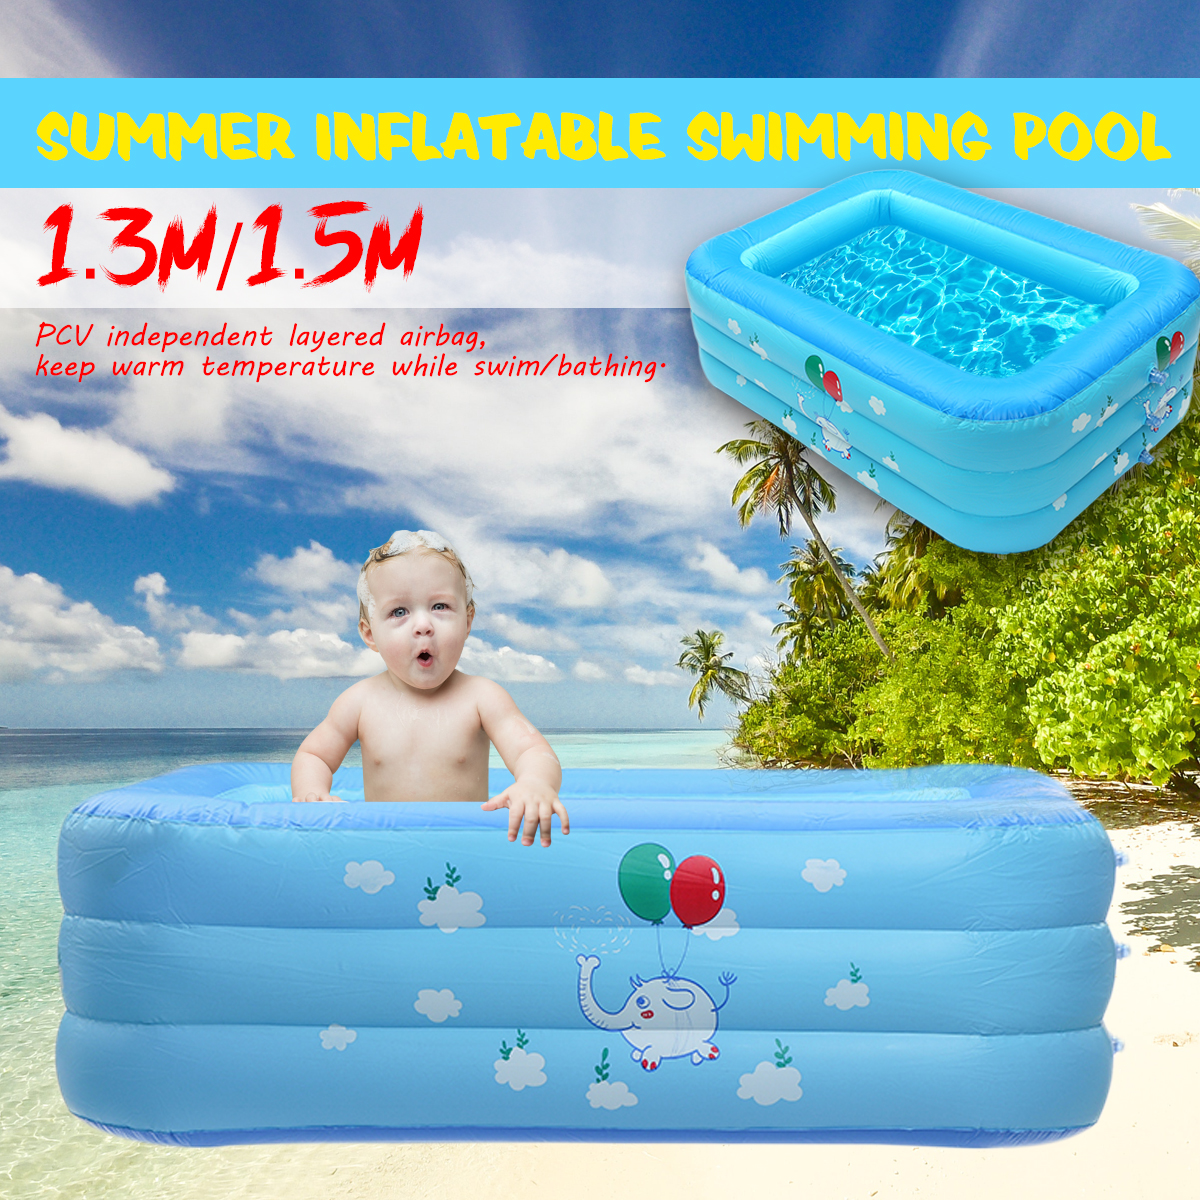 130CM150CM-Inflatable-Swimming-Pool-Outdoor-Summer-Family-Bathing-Pool-Kids-Fun-Play-Water-Pool-1571405-1